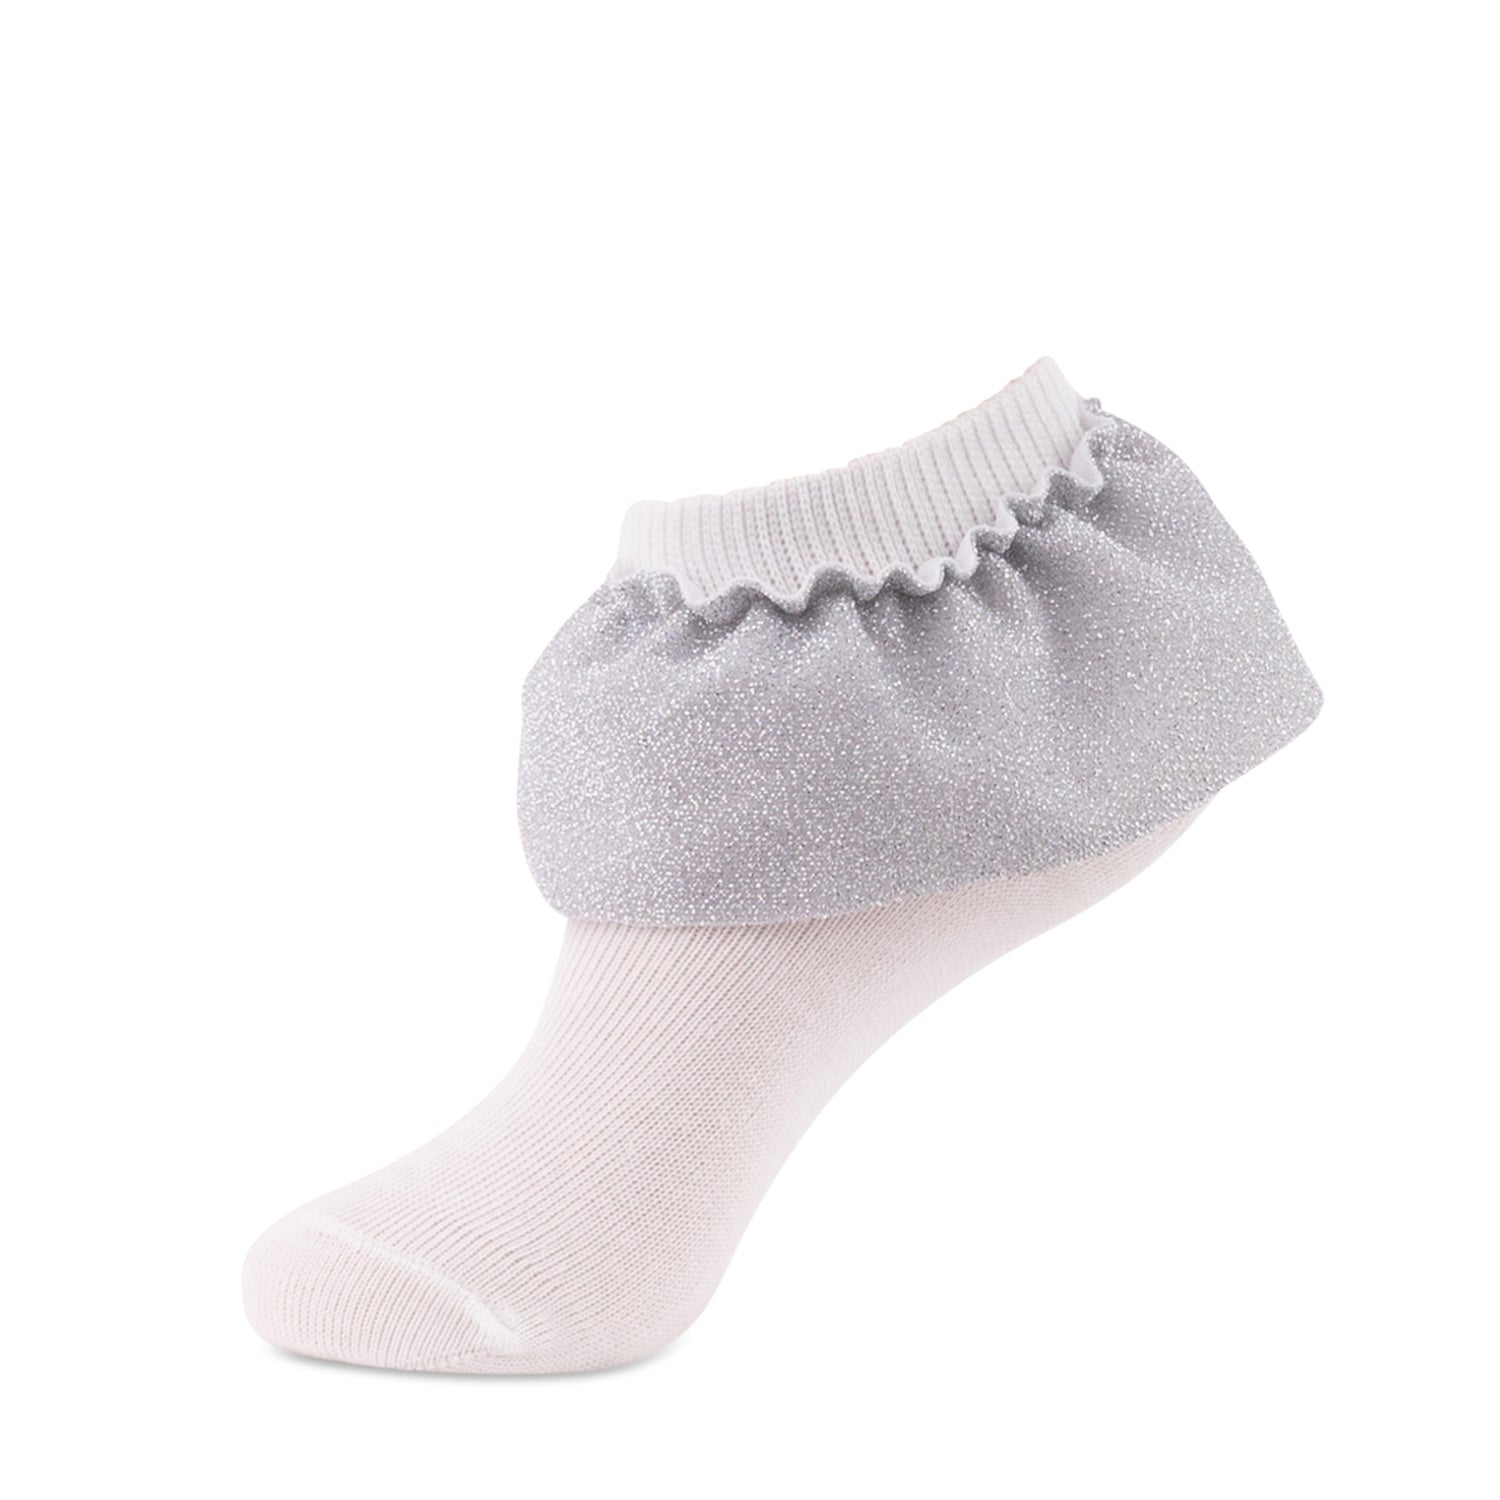 jrp socks white glitz lace anklet with silver ruffle